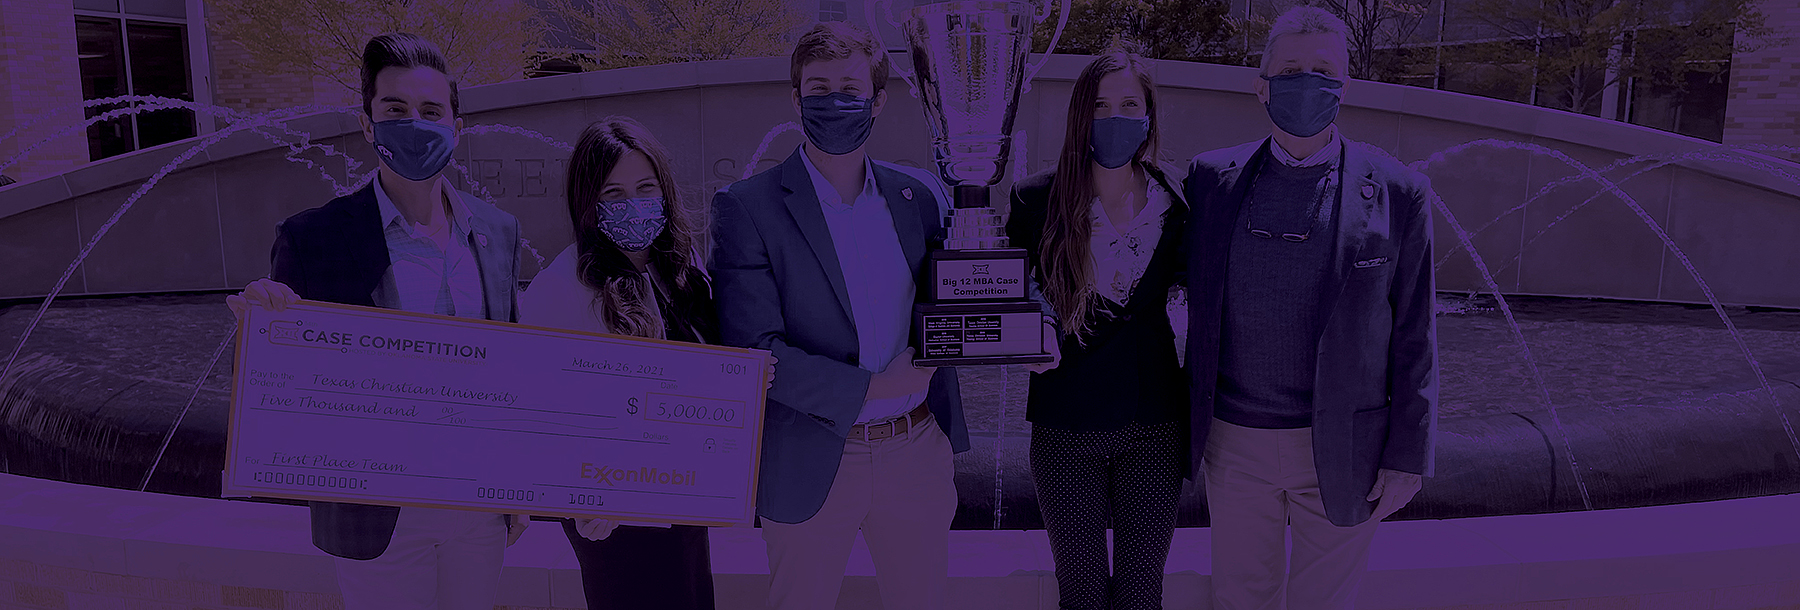 Section Image: Big 12 Case Competition winning team with check and trophy 